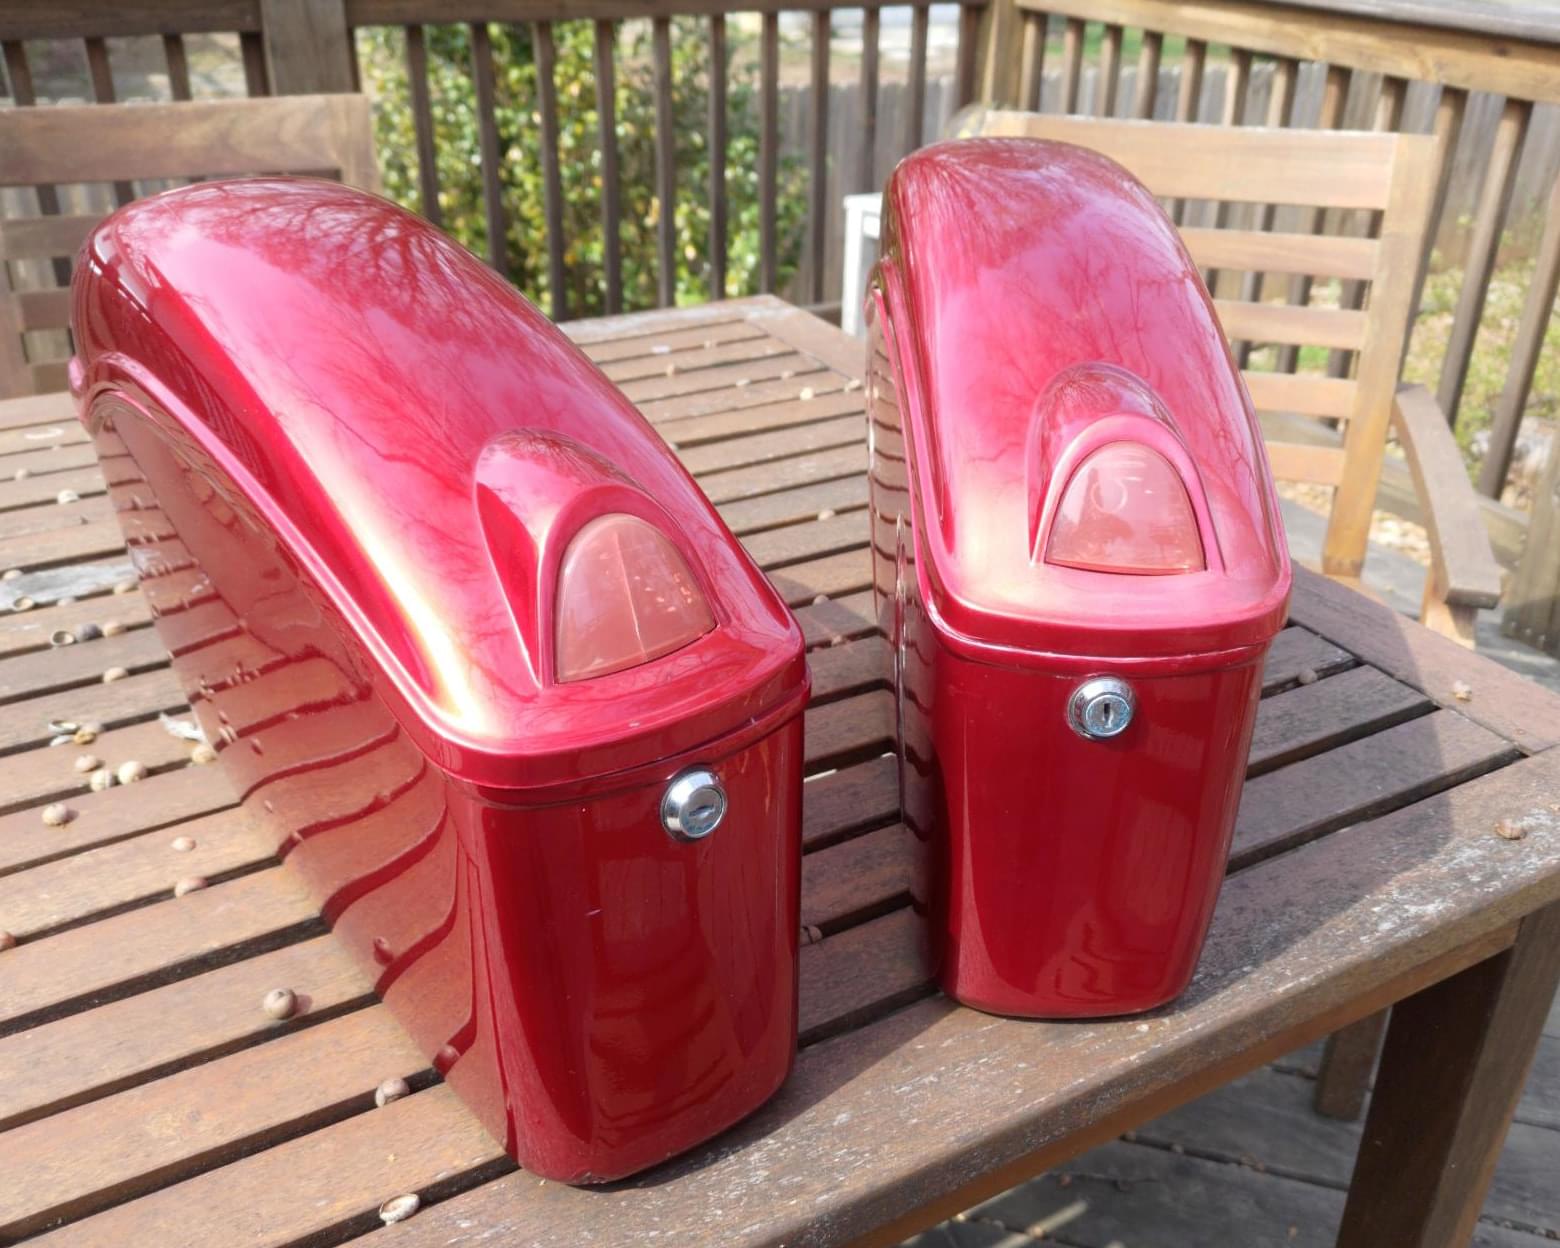 The panniers started out red with lock cores, lights, and shiny paint.